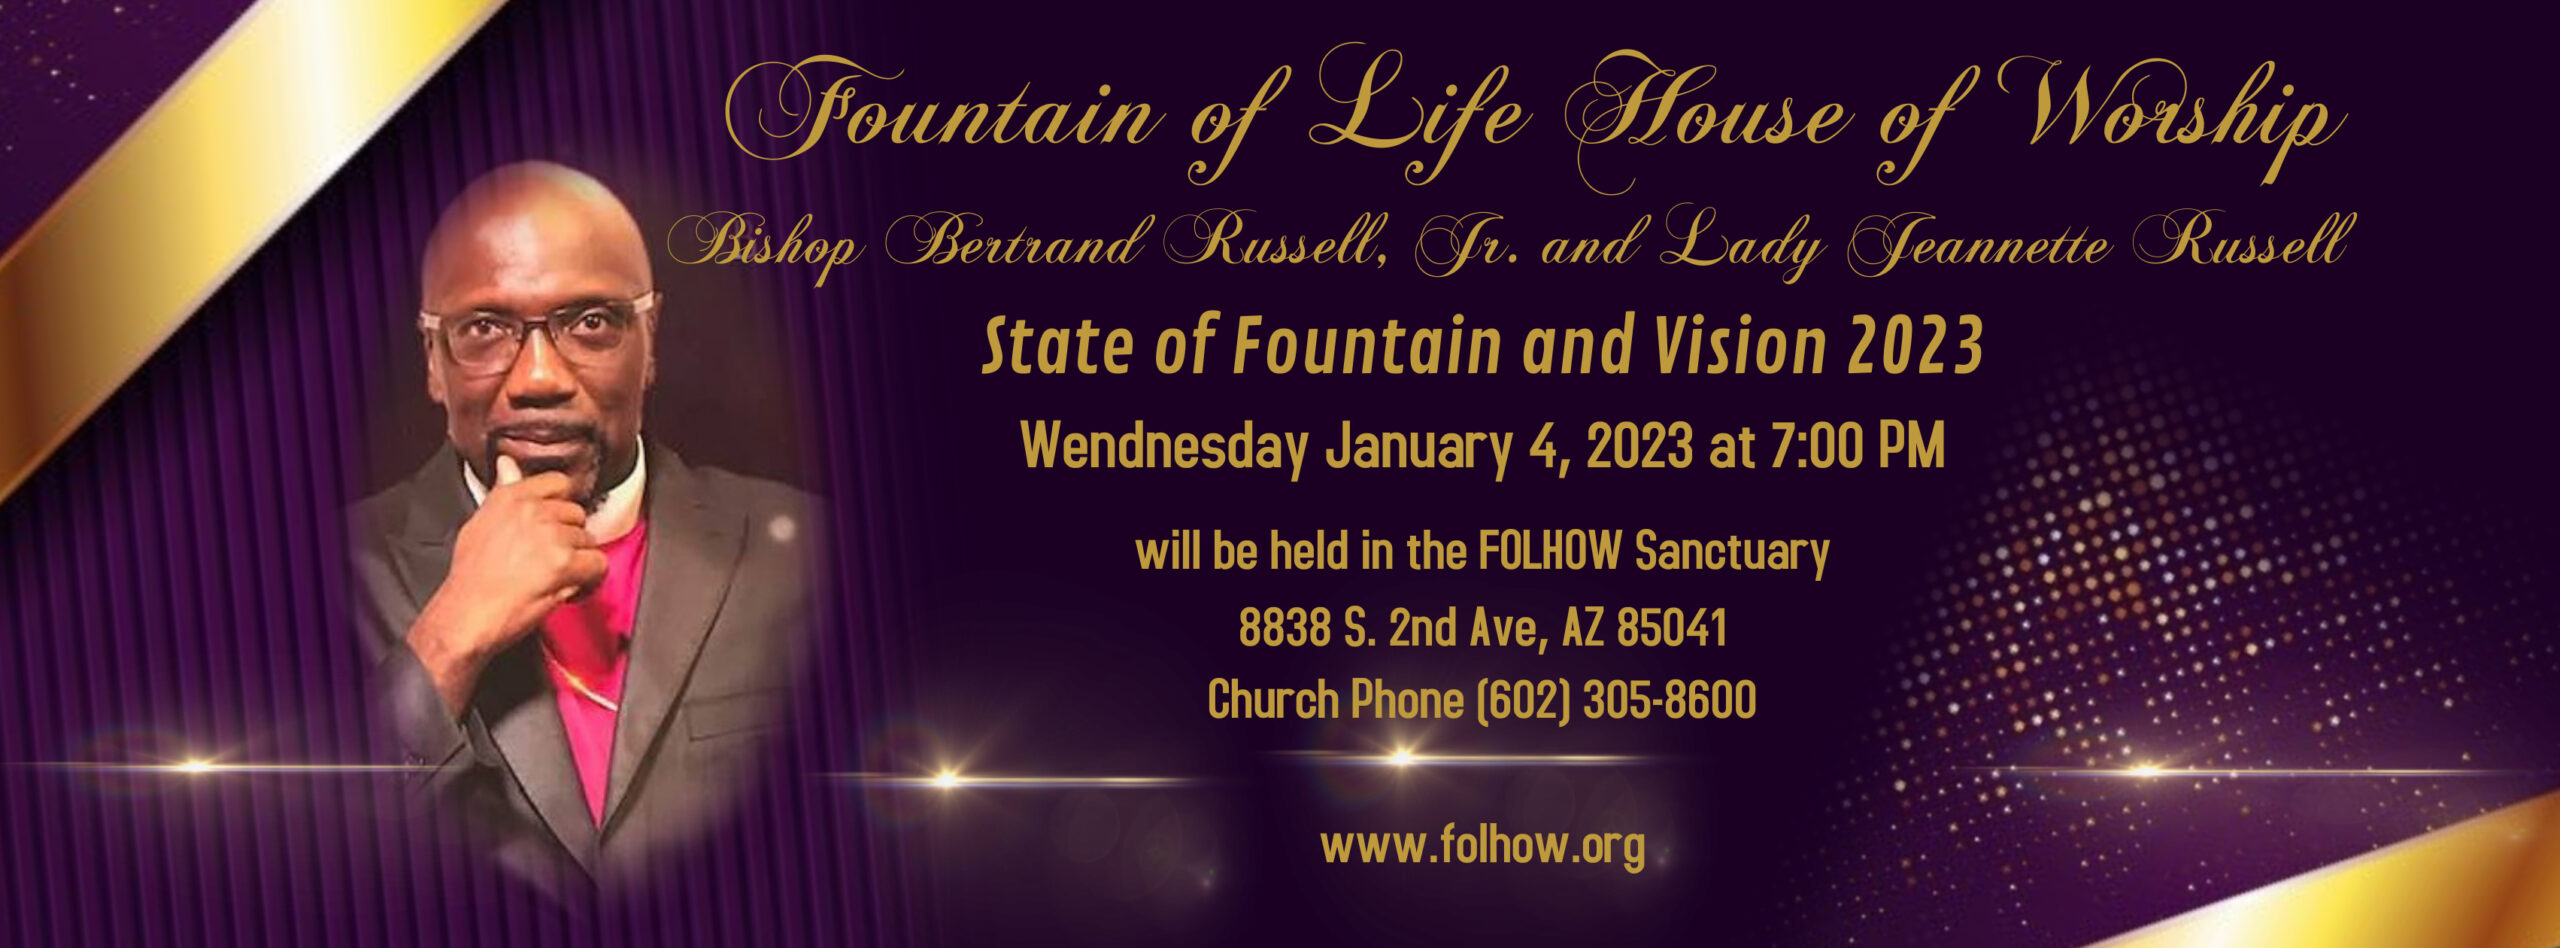 State of Fountain and Vision 2023